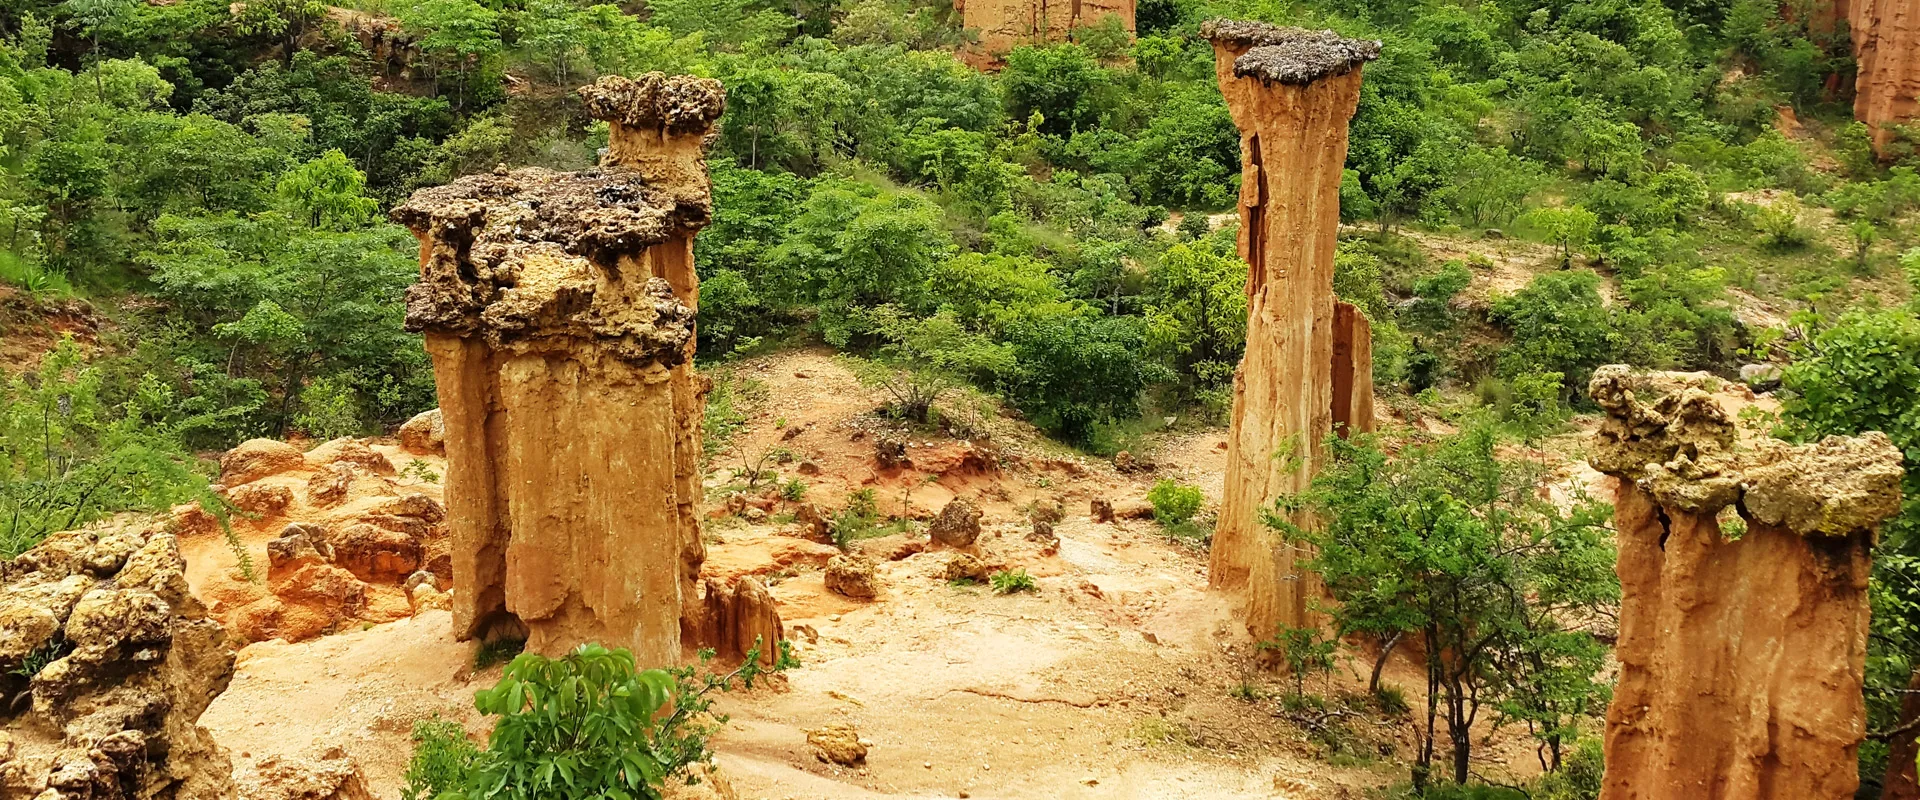 Isimila Stone Age Site in Tanzania, Africa | Excavations - Rated 0.8